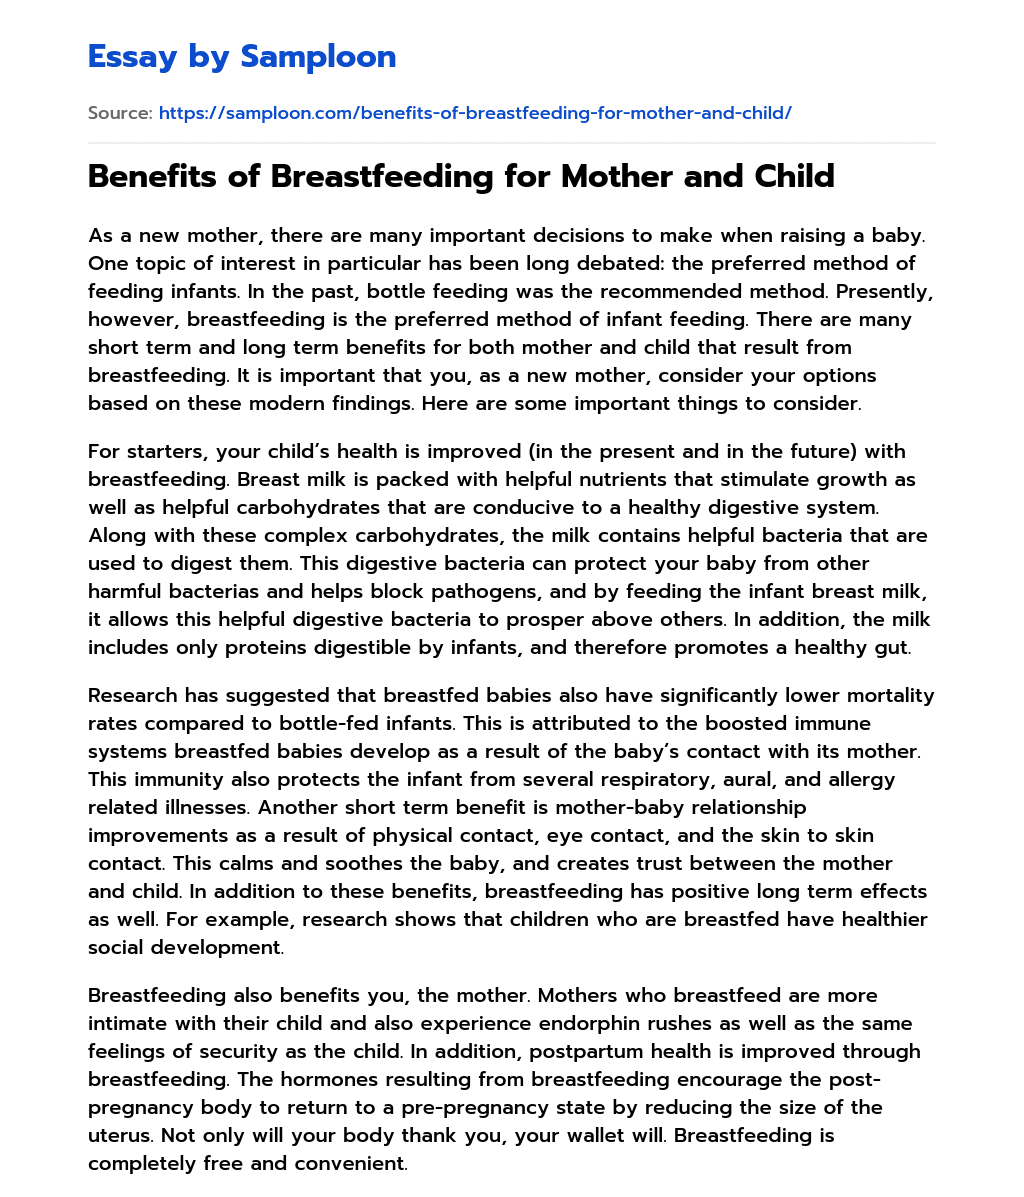 Benefits of Breastfeeding for Mother and Child essay